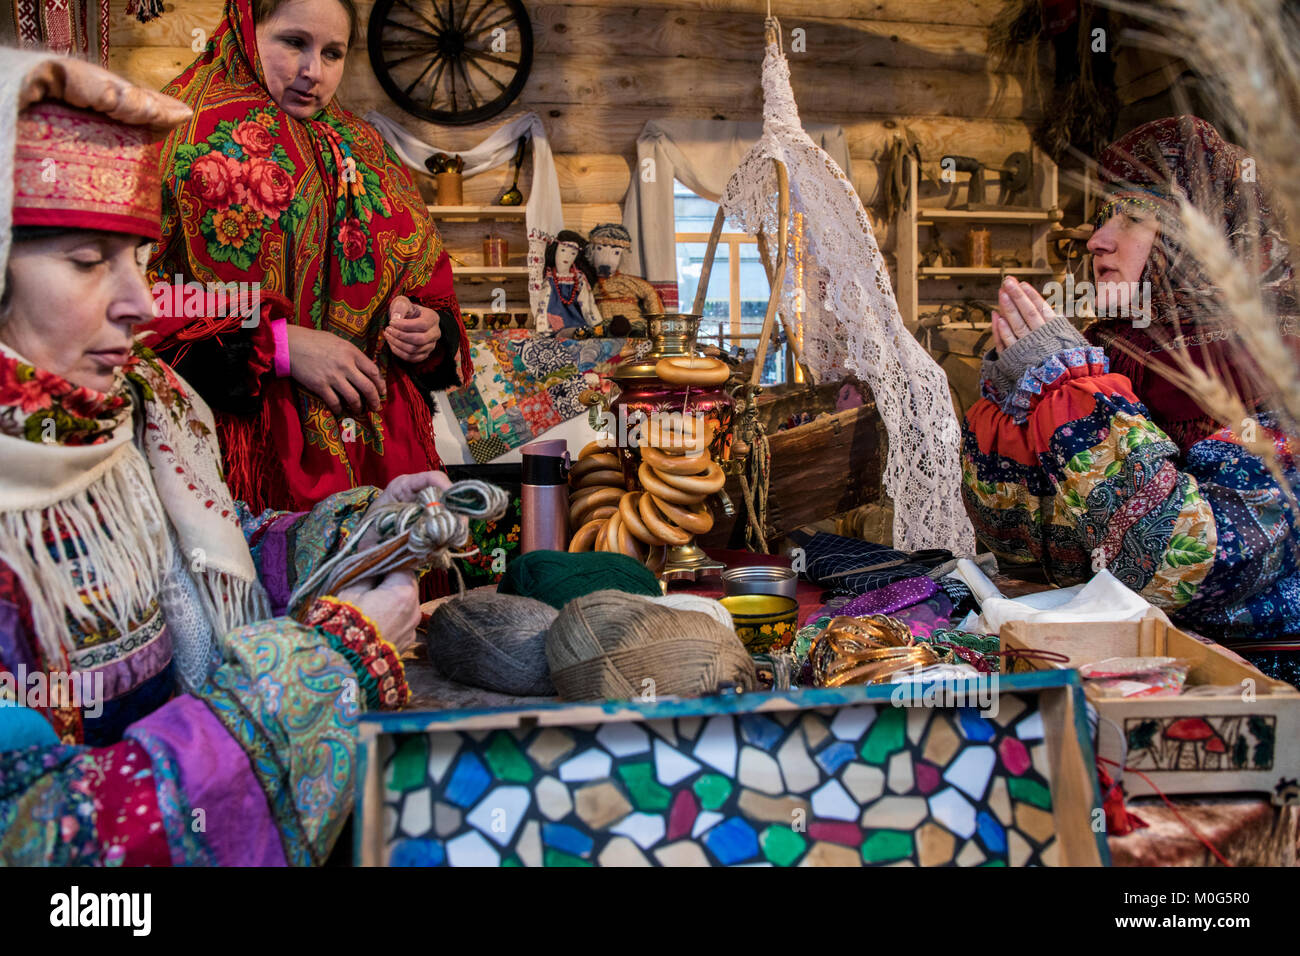 Women in Russian national costumes do needlework in a traditional russian house at a table with a samovar and bagels, Russia Stock Photo